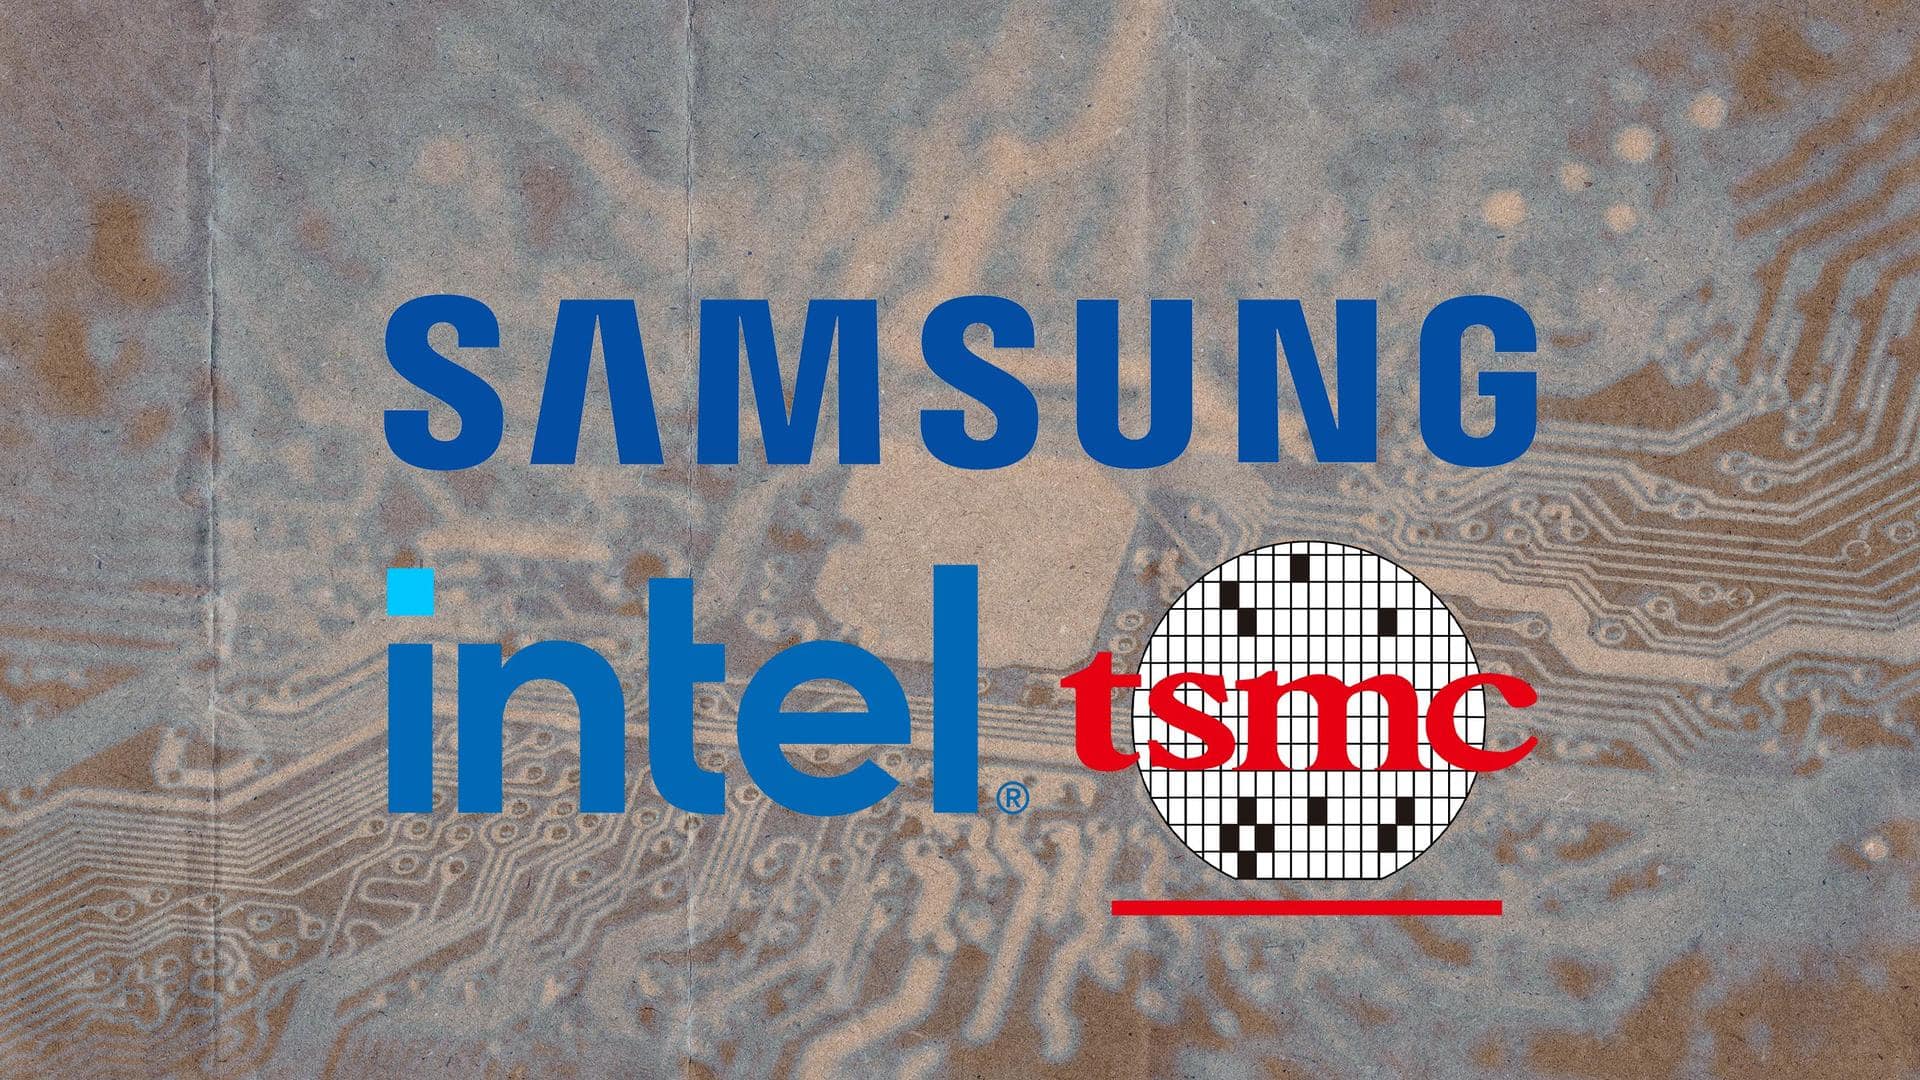 Chipmakers like Intel, TSMC, Samsung are performing poorly: Here's why